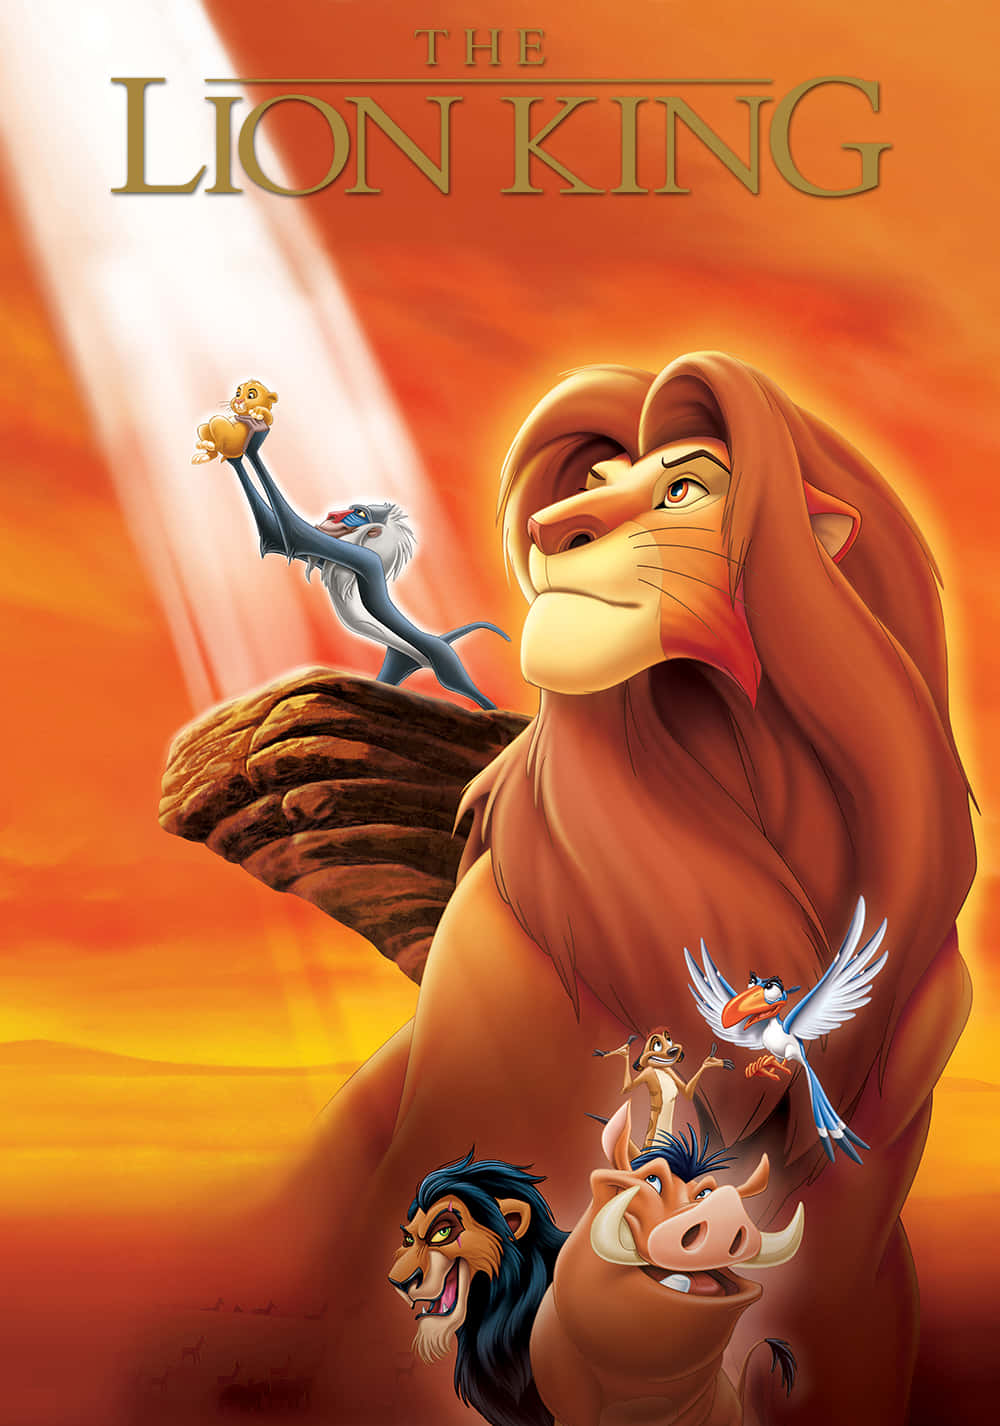 the lion king movie poster Wallpaper